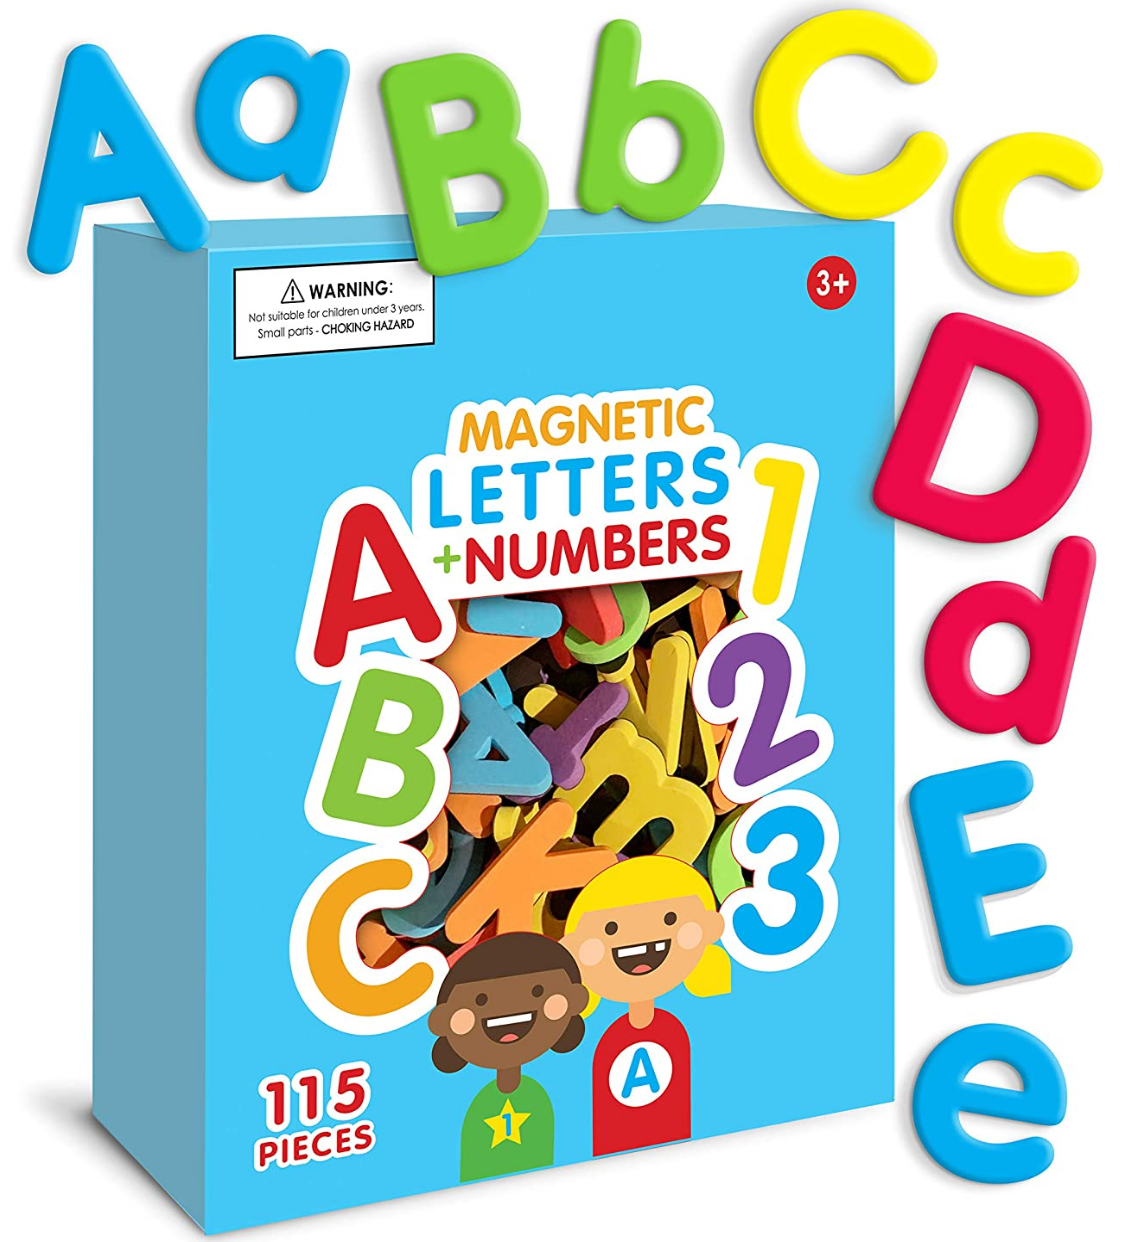 Curious Columbus Magnetic Letters and Numbers Review